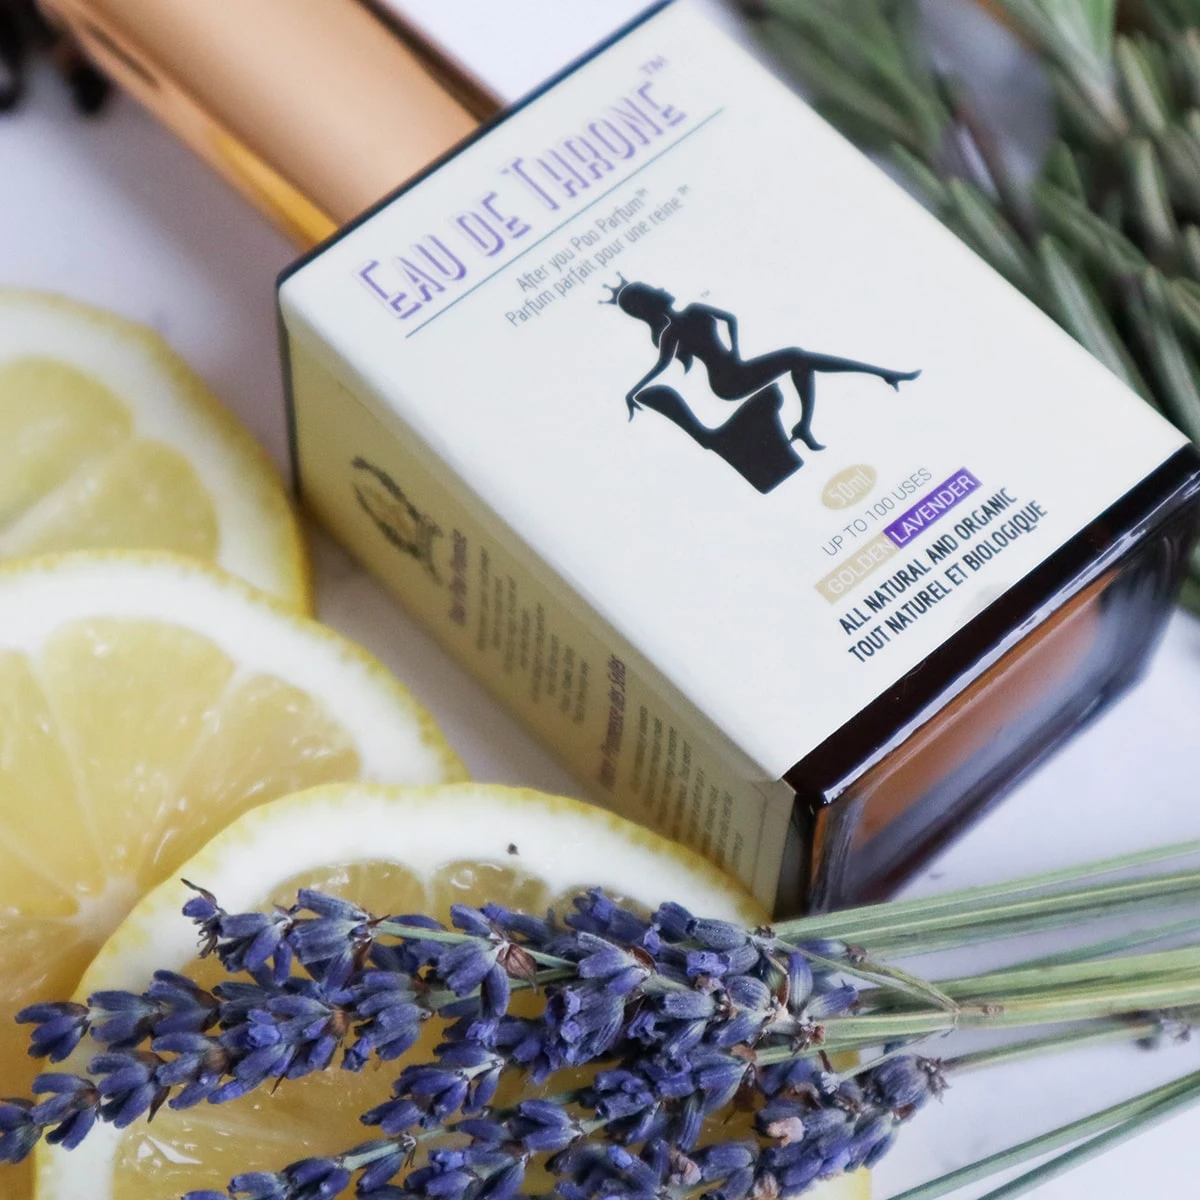 Queen of the Thrones Eau the Thrones is made of  a blend of organic essential oils